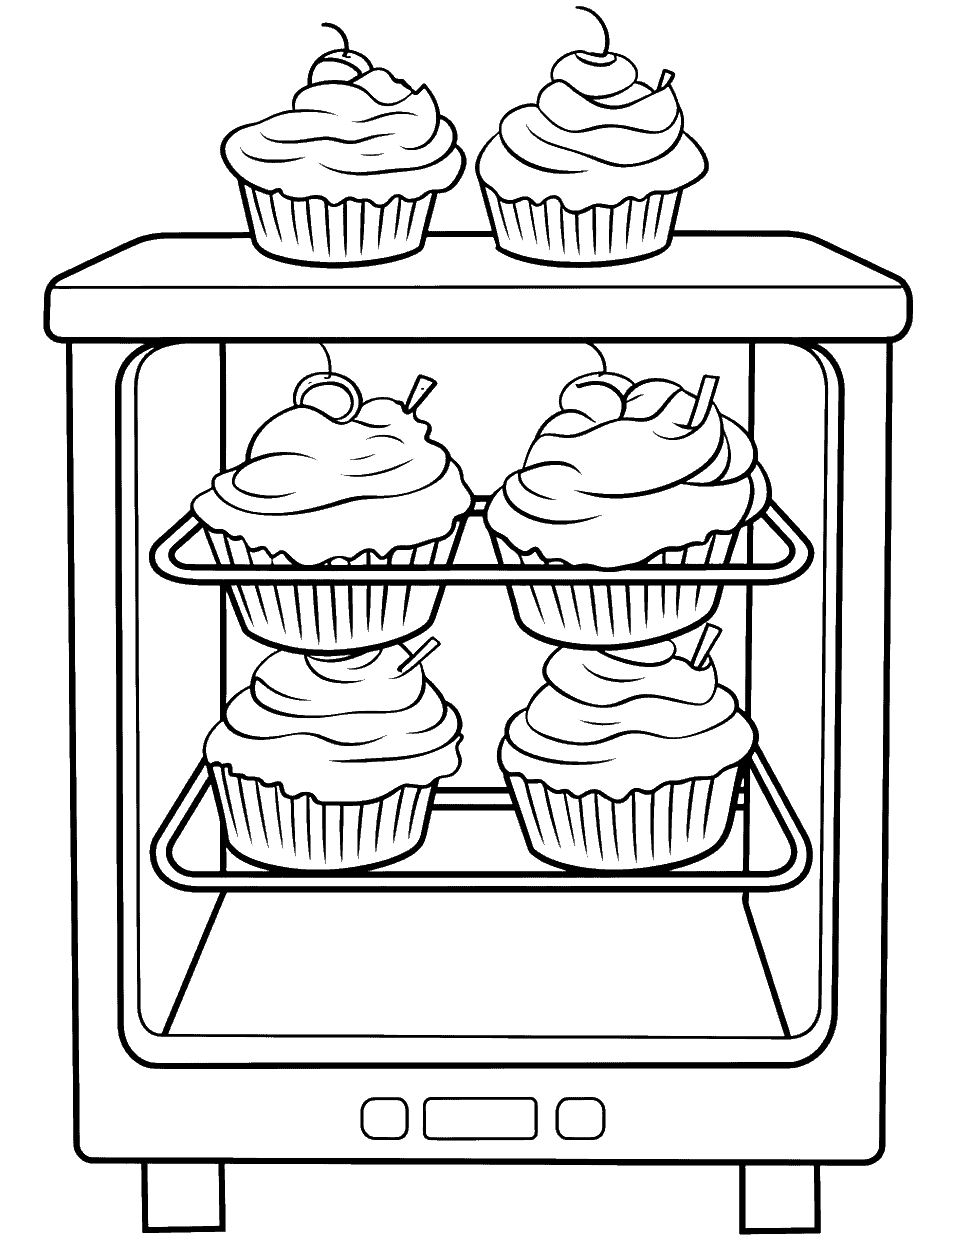 Cupcake in the Oven Coloring Page - A scene showing a cupcake baking inside an oven.